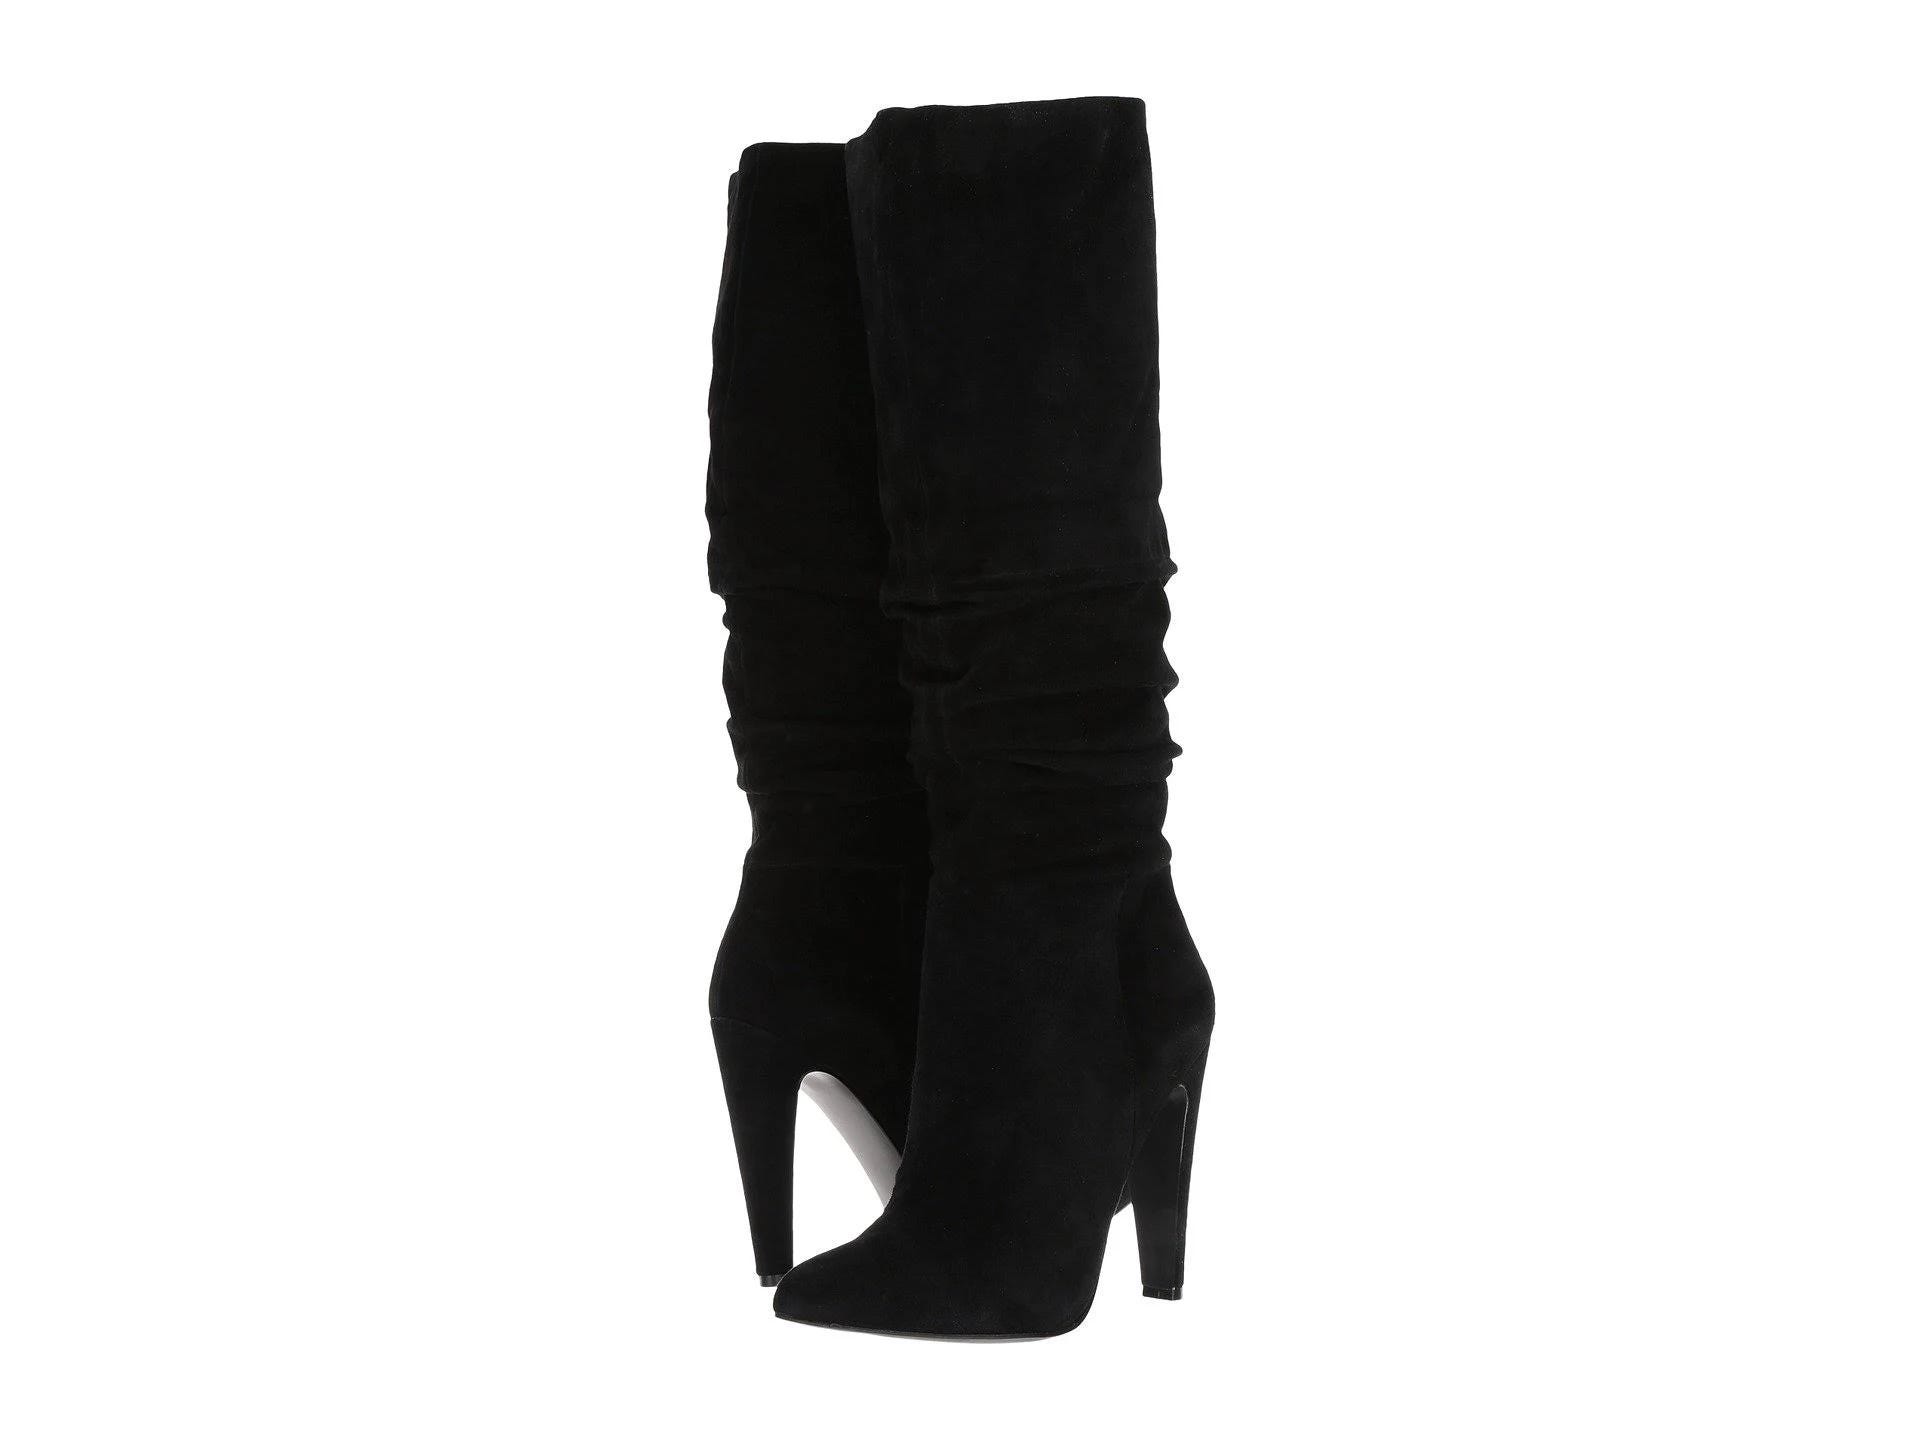 Fashionable Slouchy Knee High Boots - Pointed Toe & Leather Upper | Image